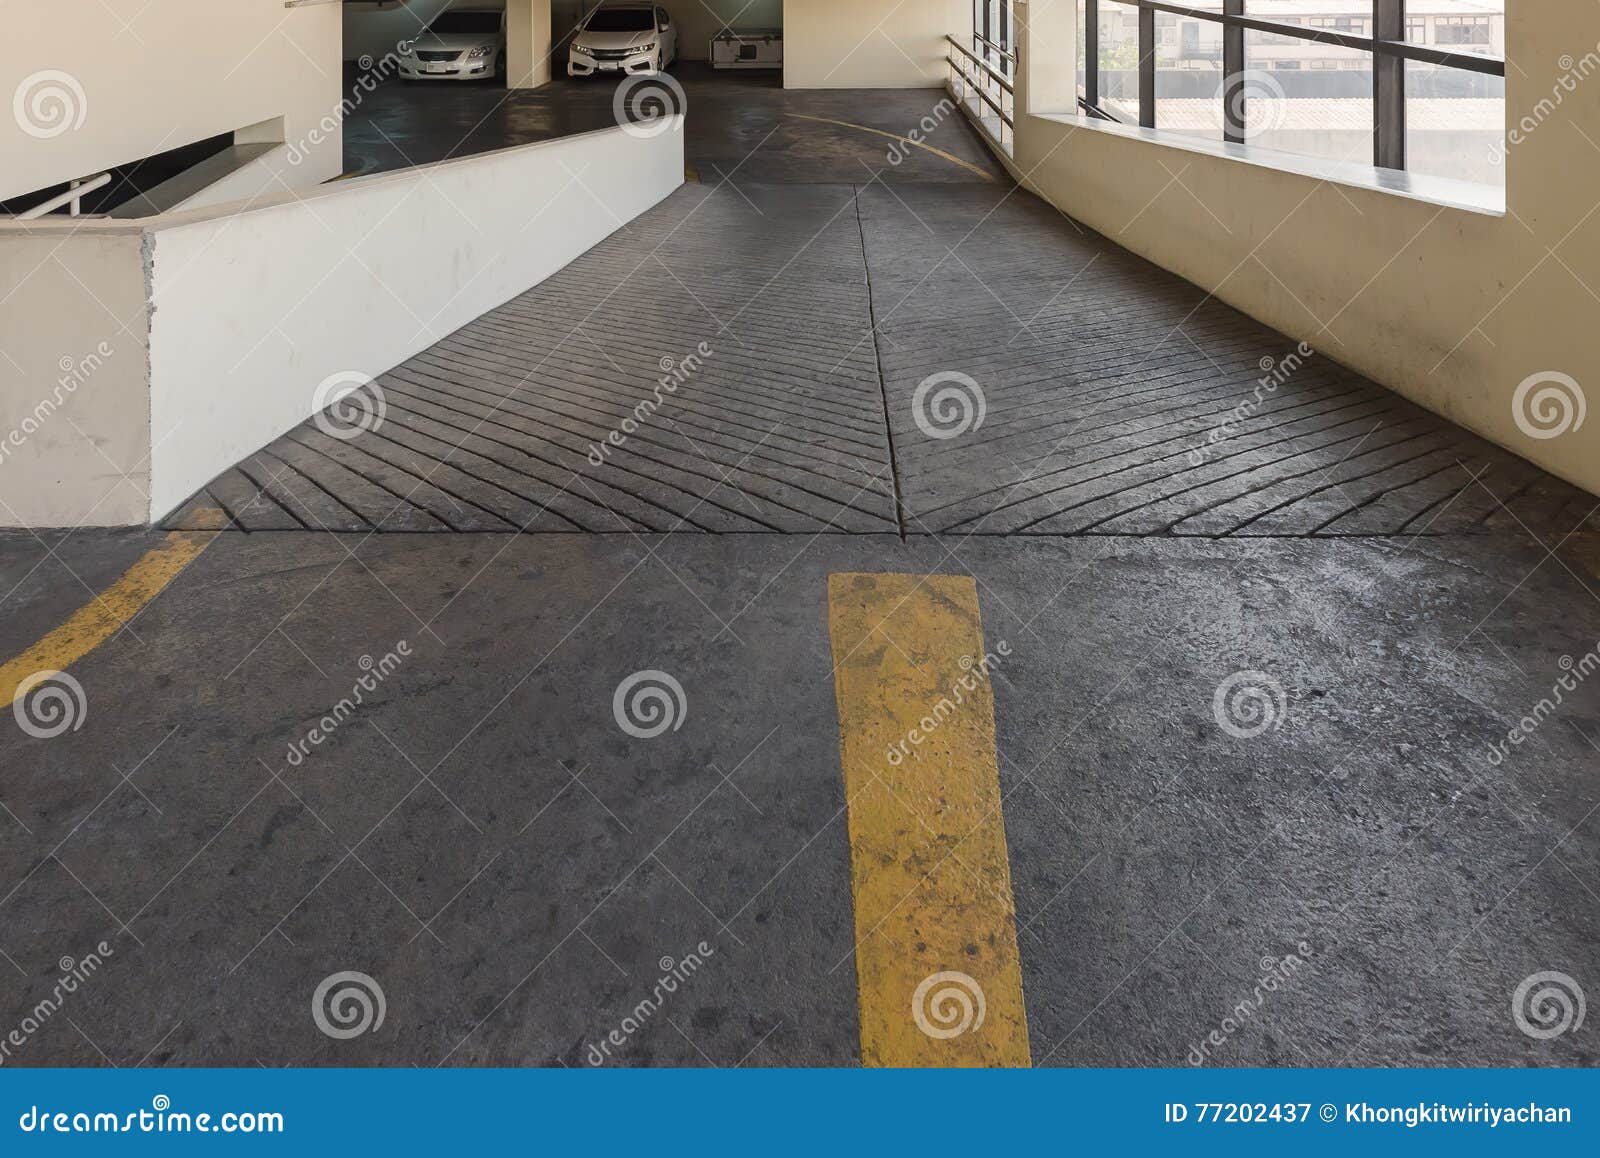 Empty Parking Deck with Ramp I Stock Image - Image of modern, ramp ...